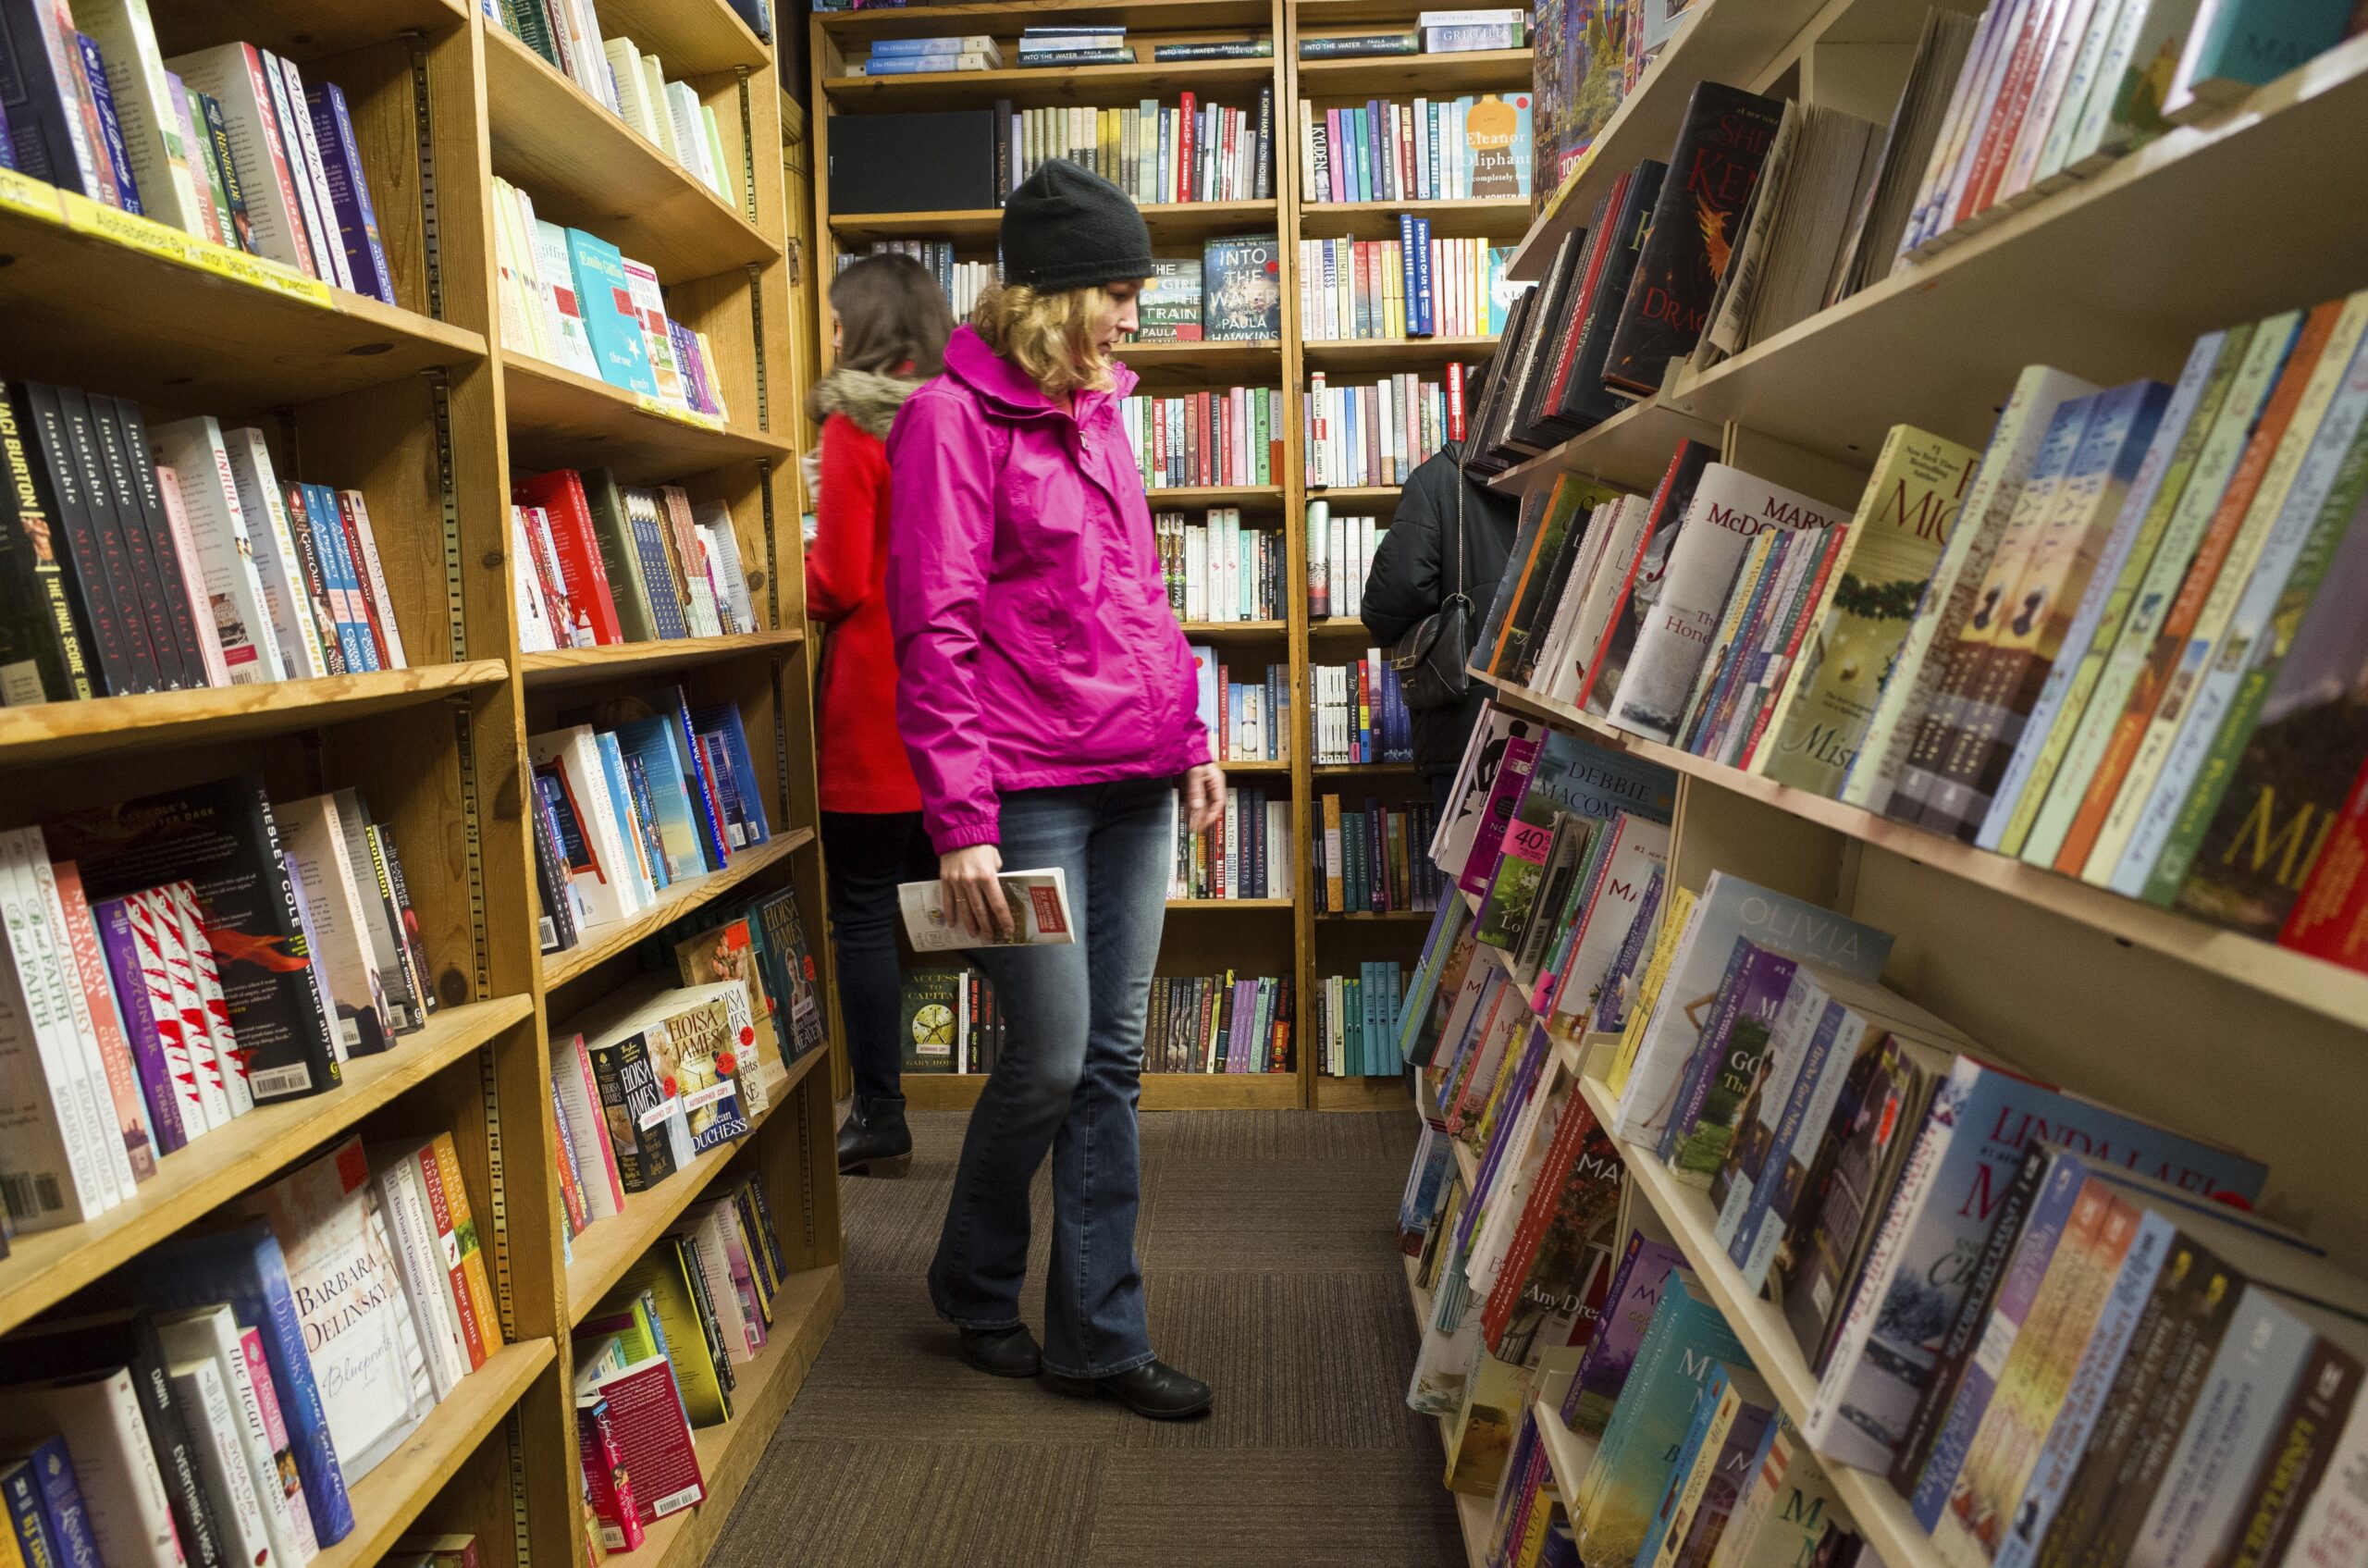 Shoppers browse among narrow rows of books